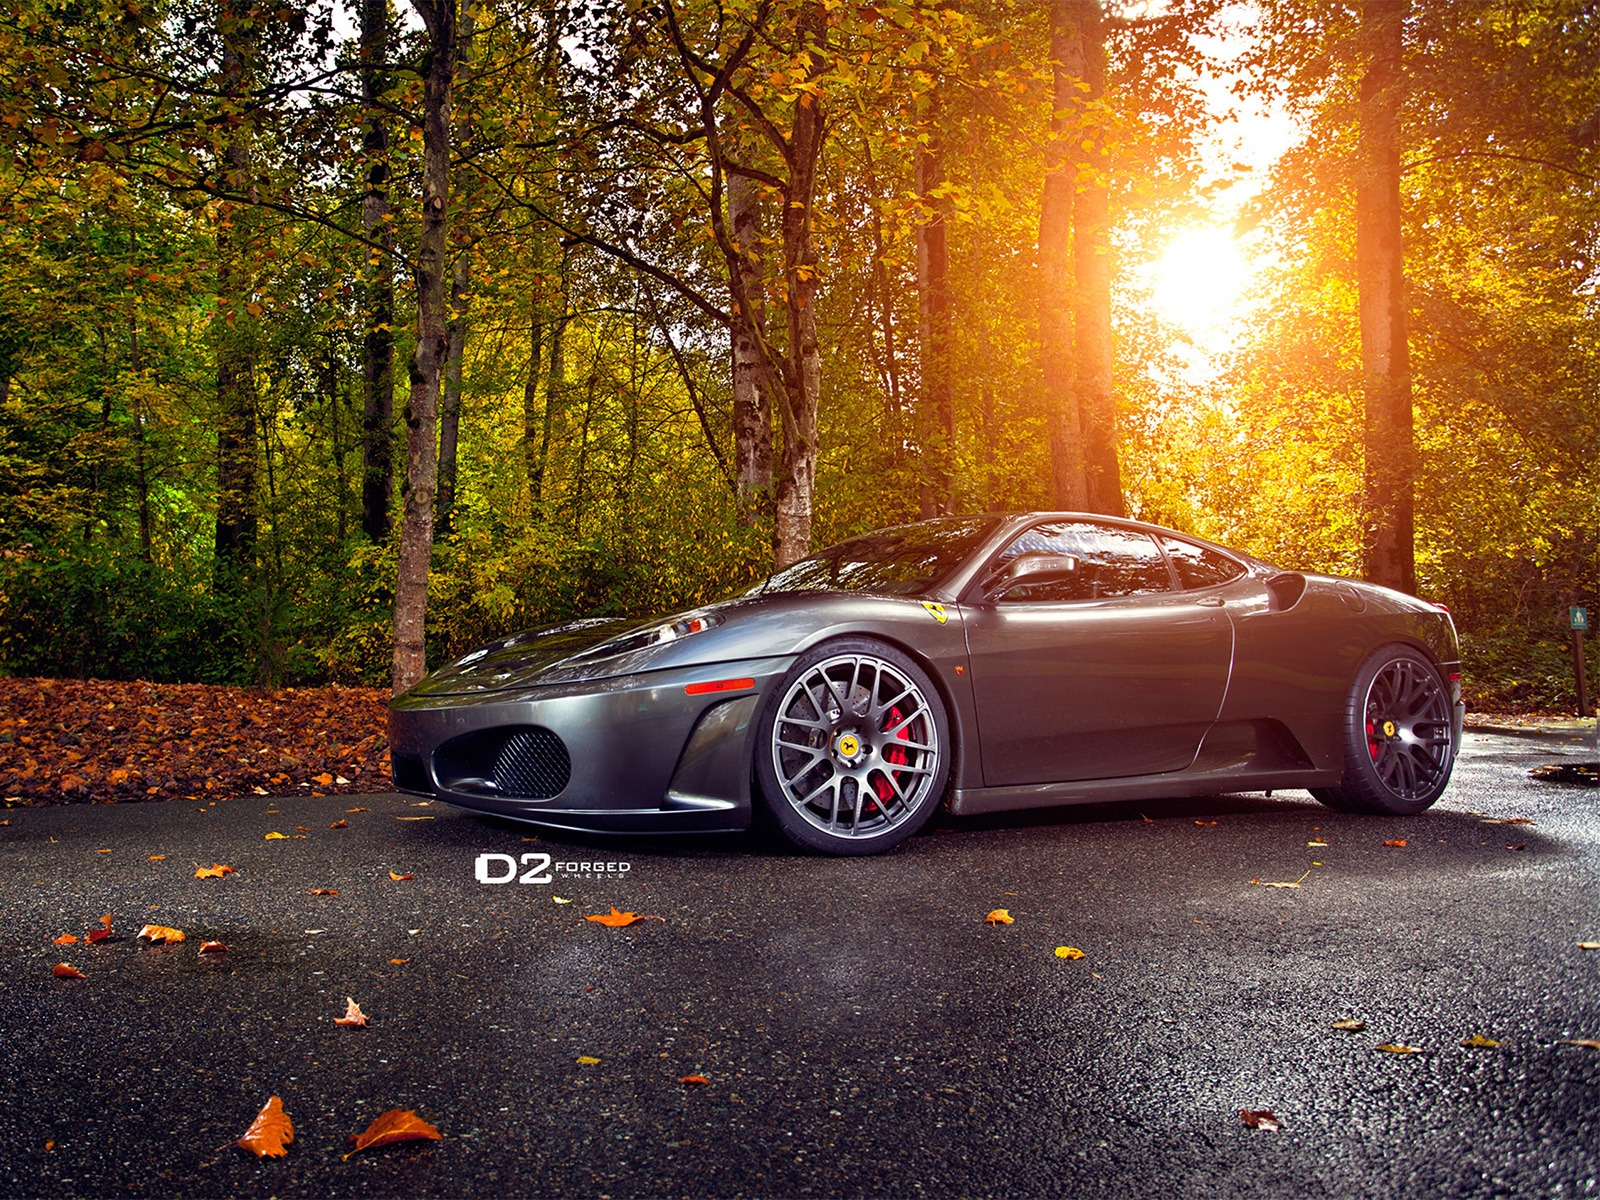 Amazing Ferrari by D2Forged for 1600 x 1200 resolution